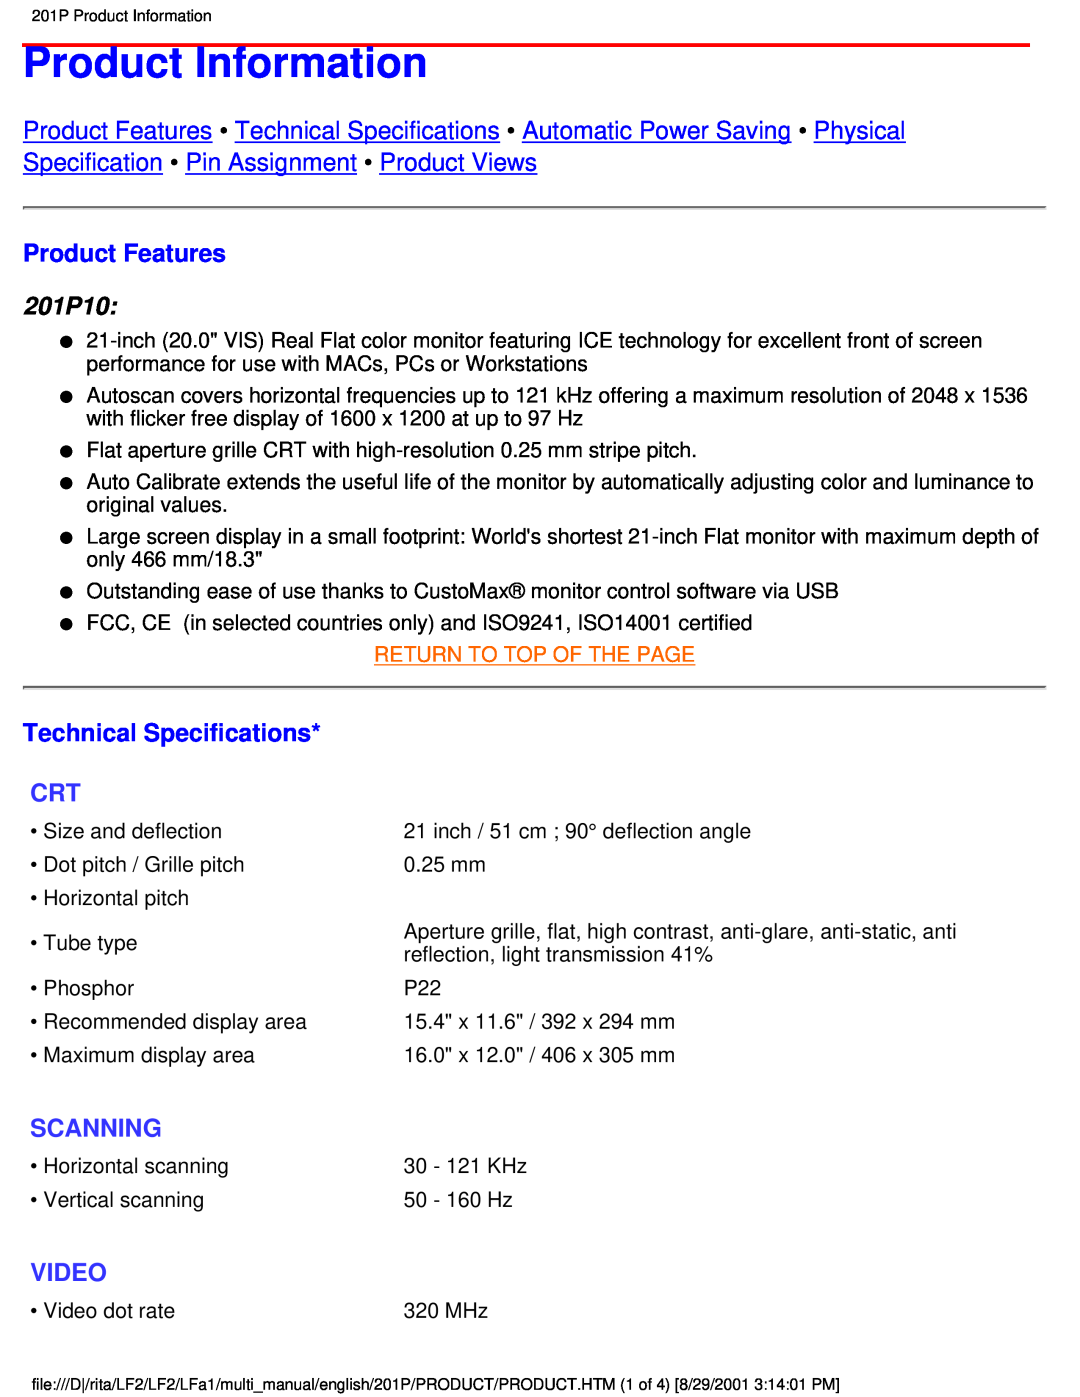 Philips user manual Product Information, Product Features, 201P10, Technical Specifications, Scanning, Video 